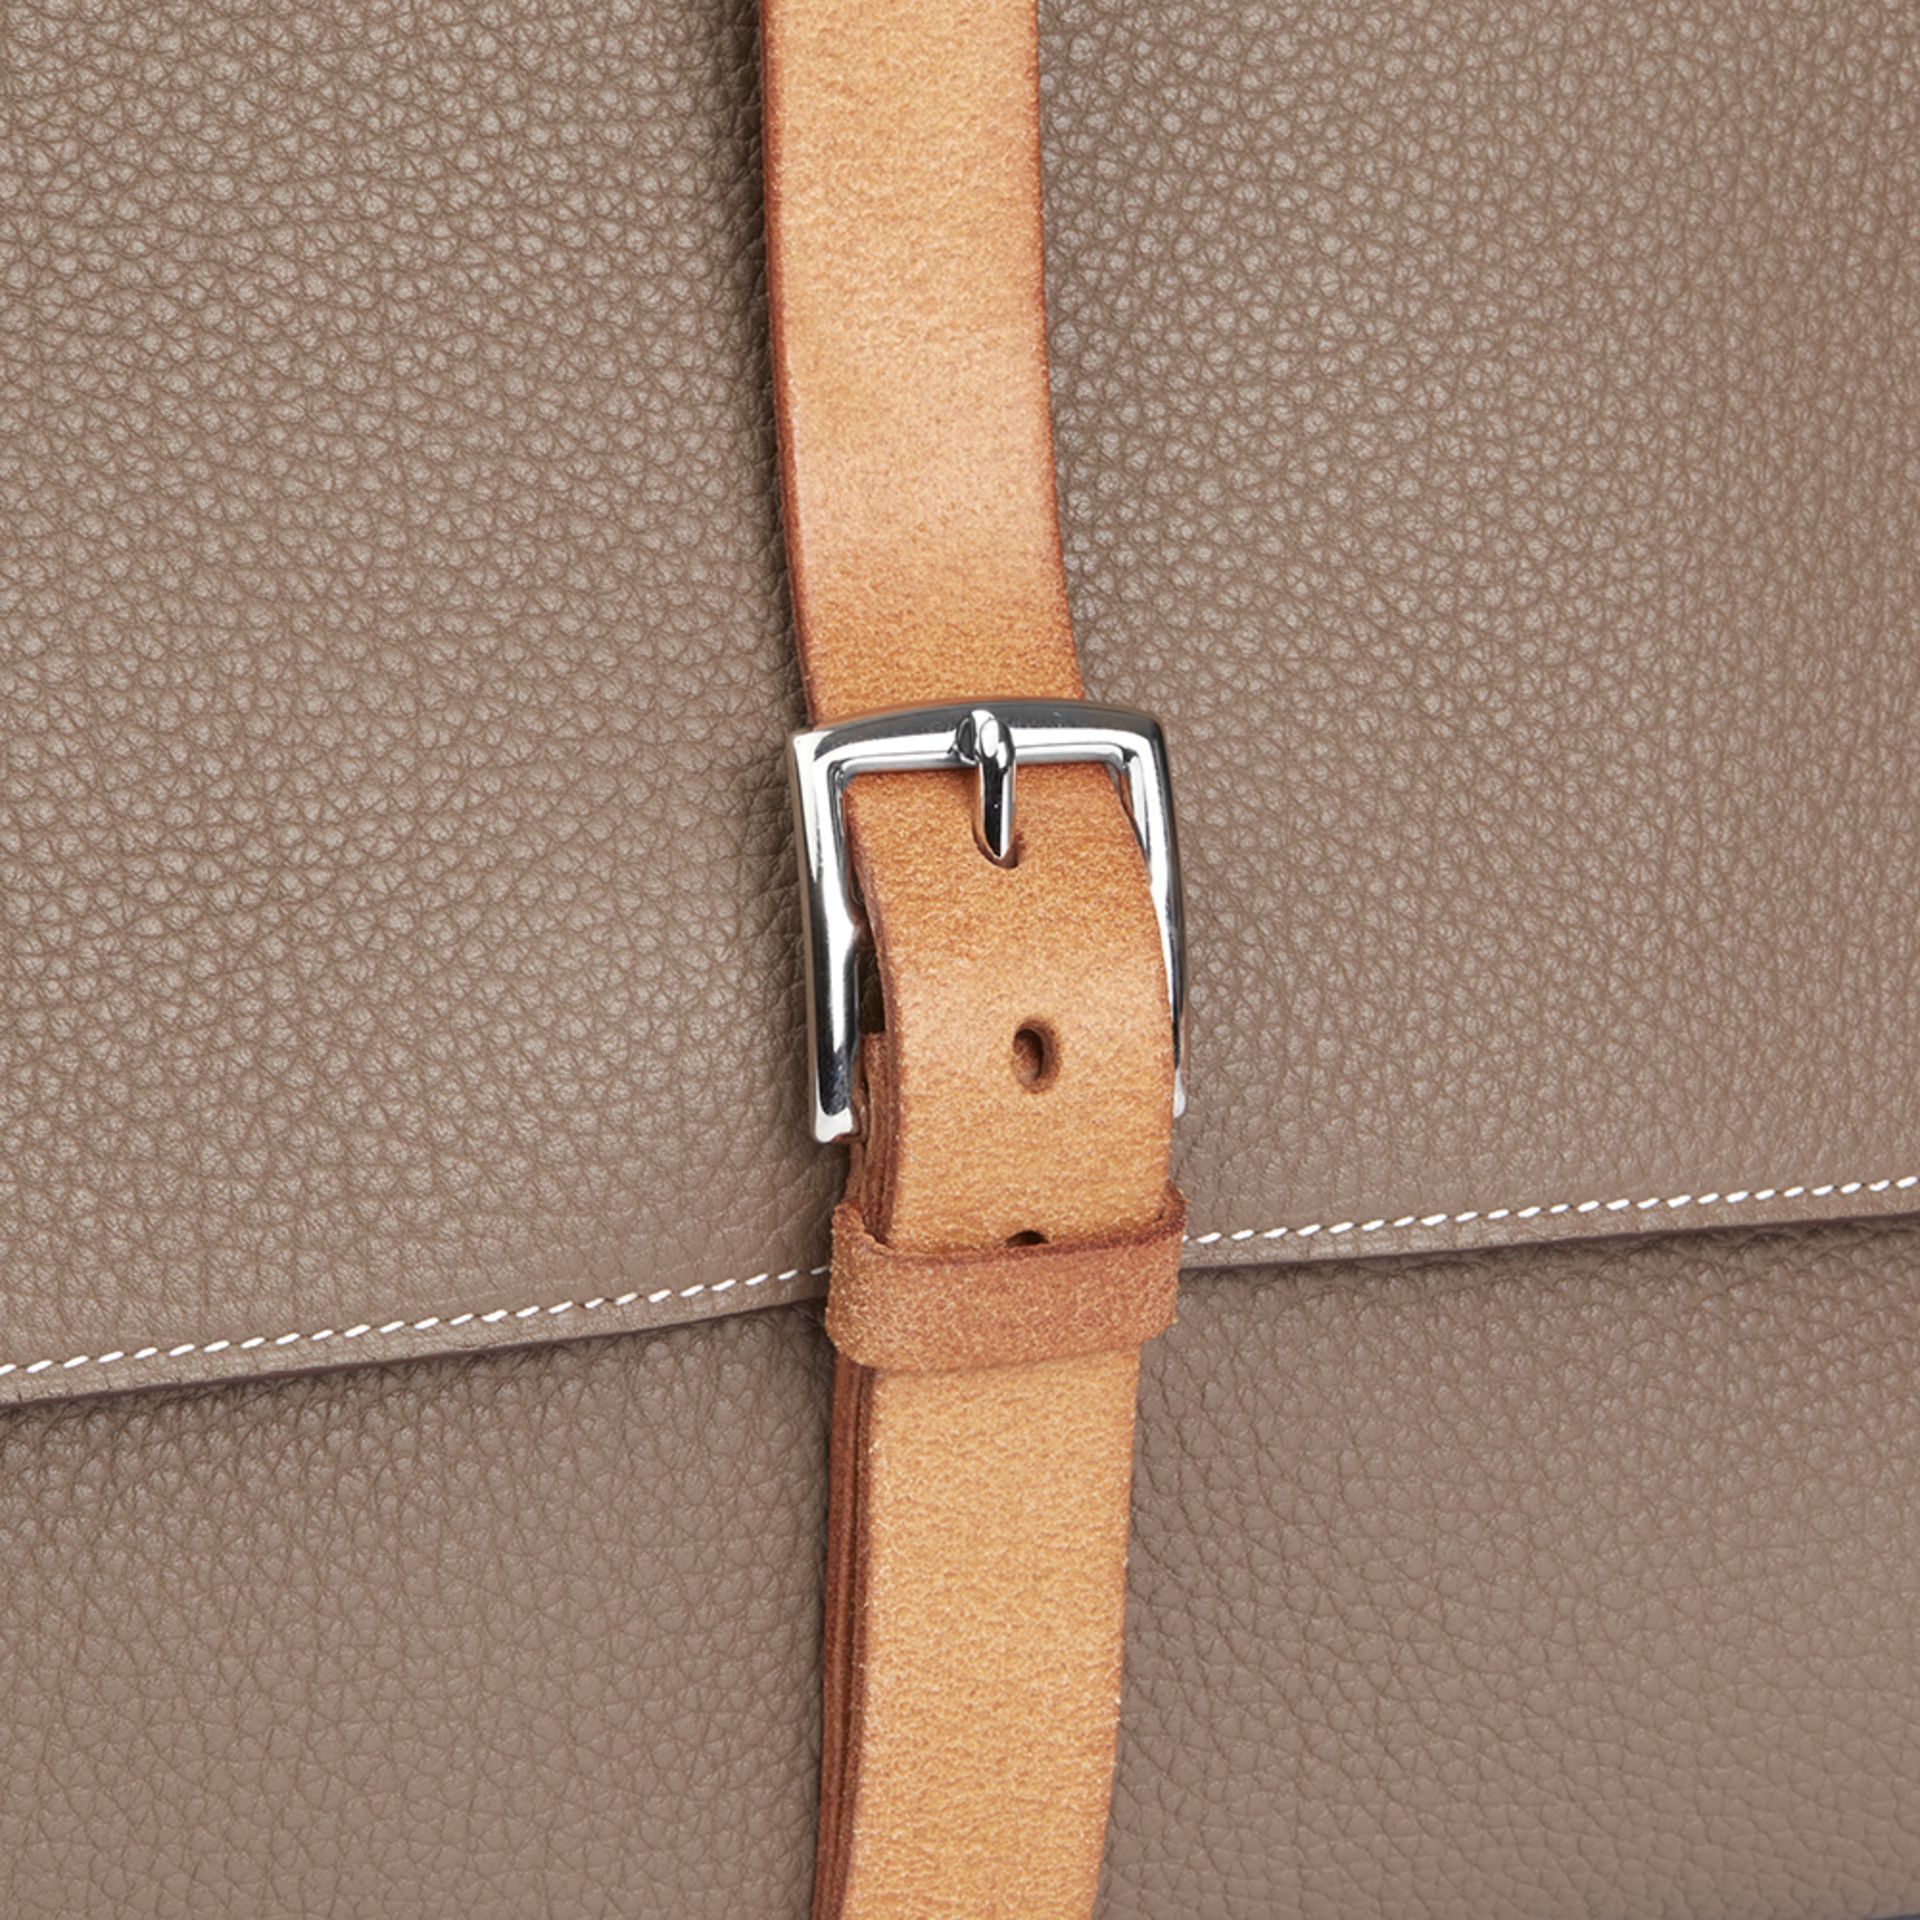 Etoupe Fjord Leather & Hunter Calfskin Leather Etriviere II - Image 6 of 10